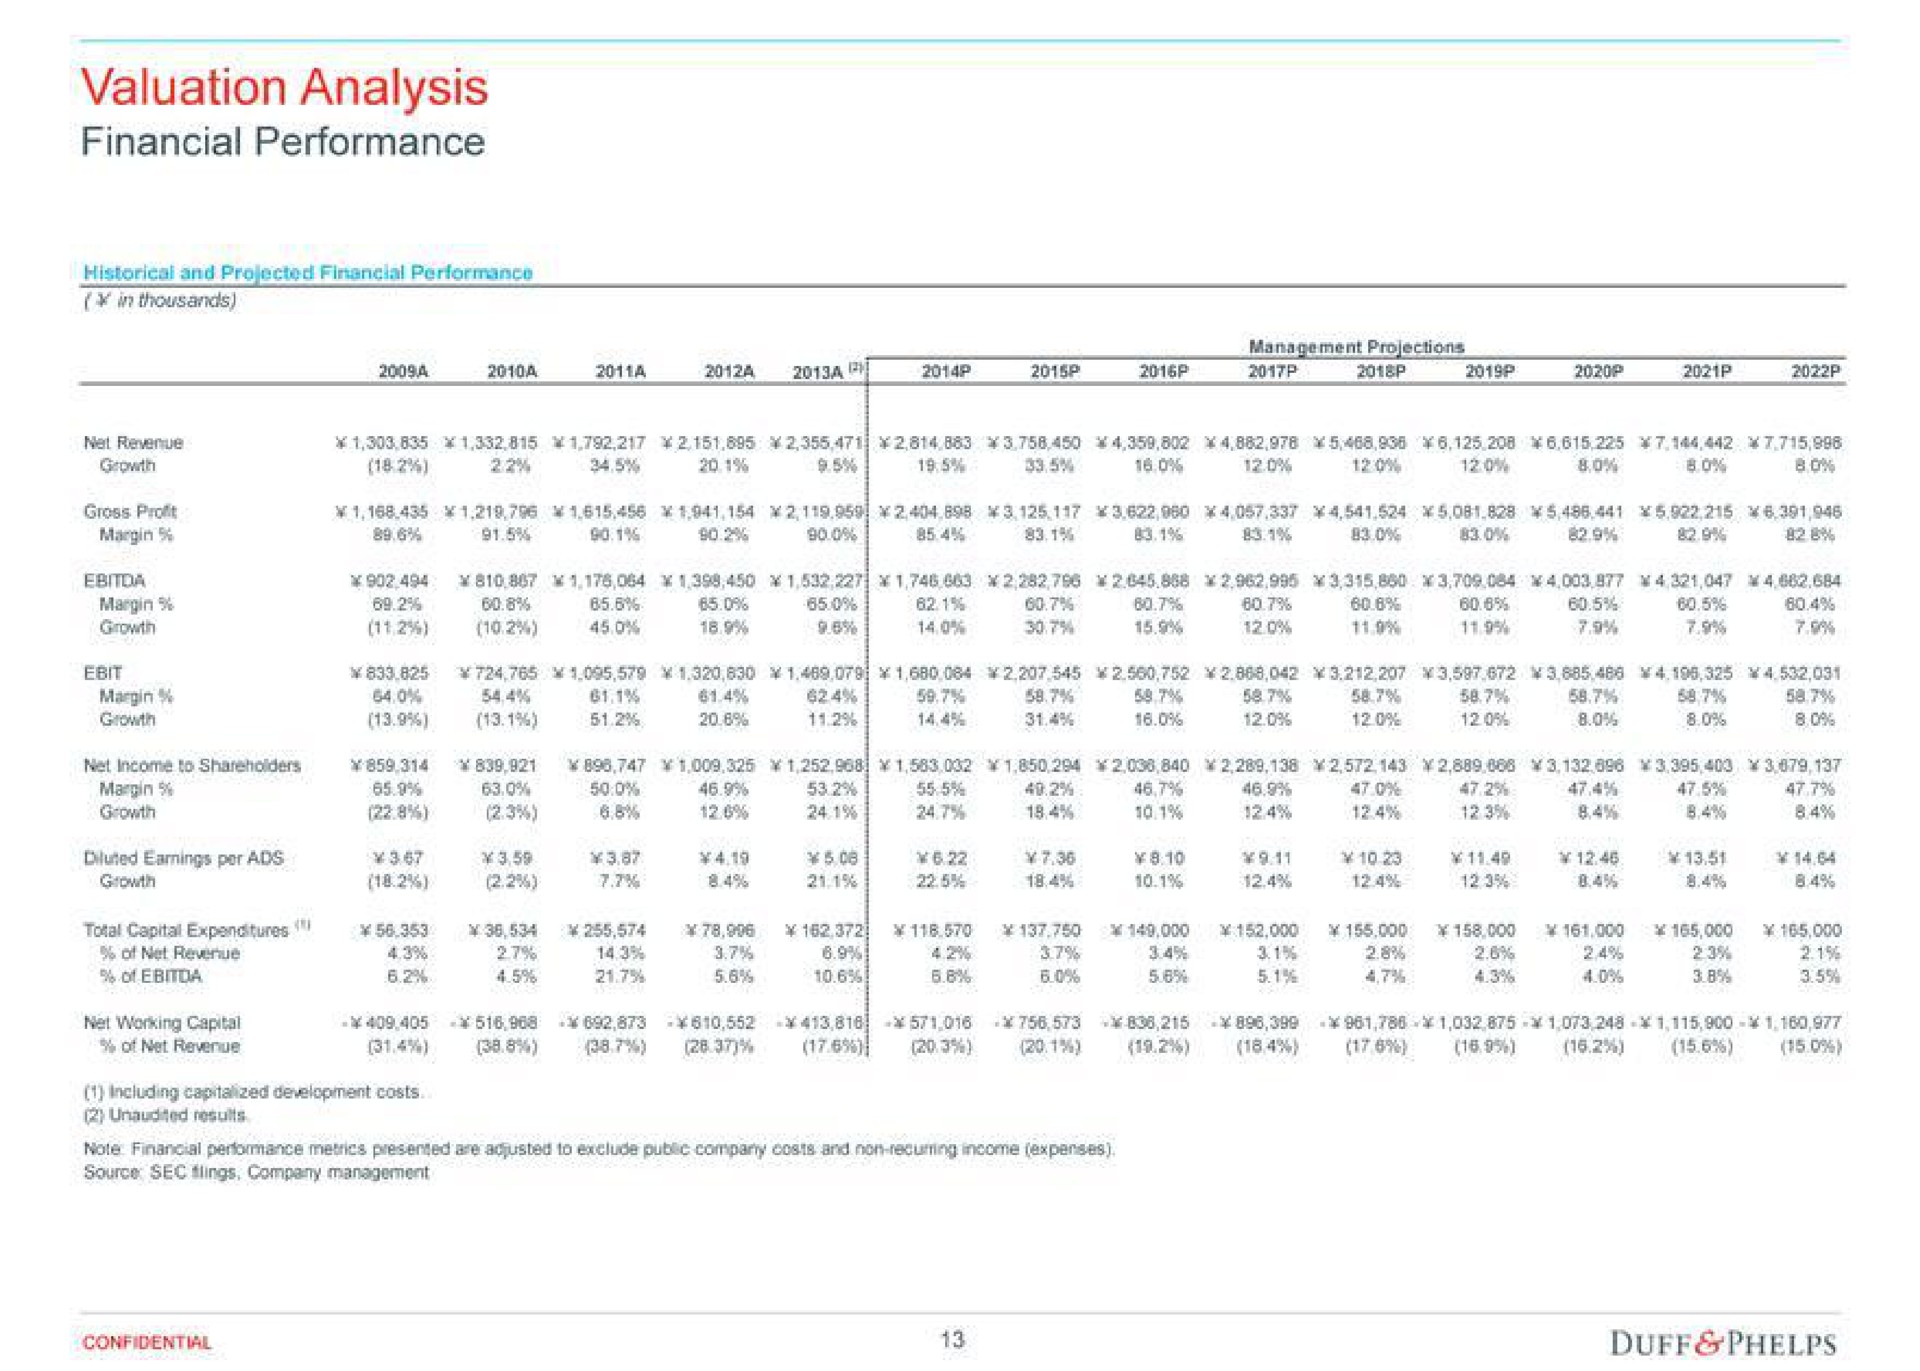 valuation analysis financial performance in thousands | Duff & Phelps